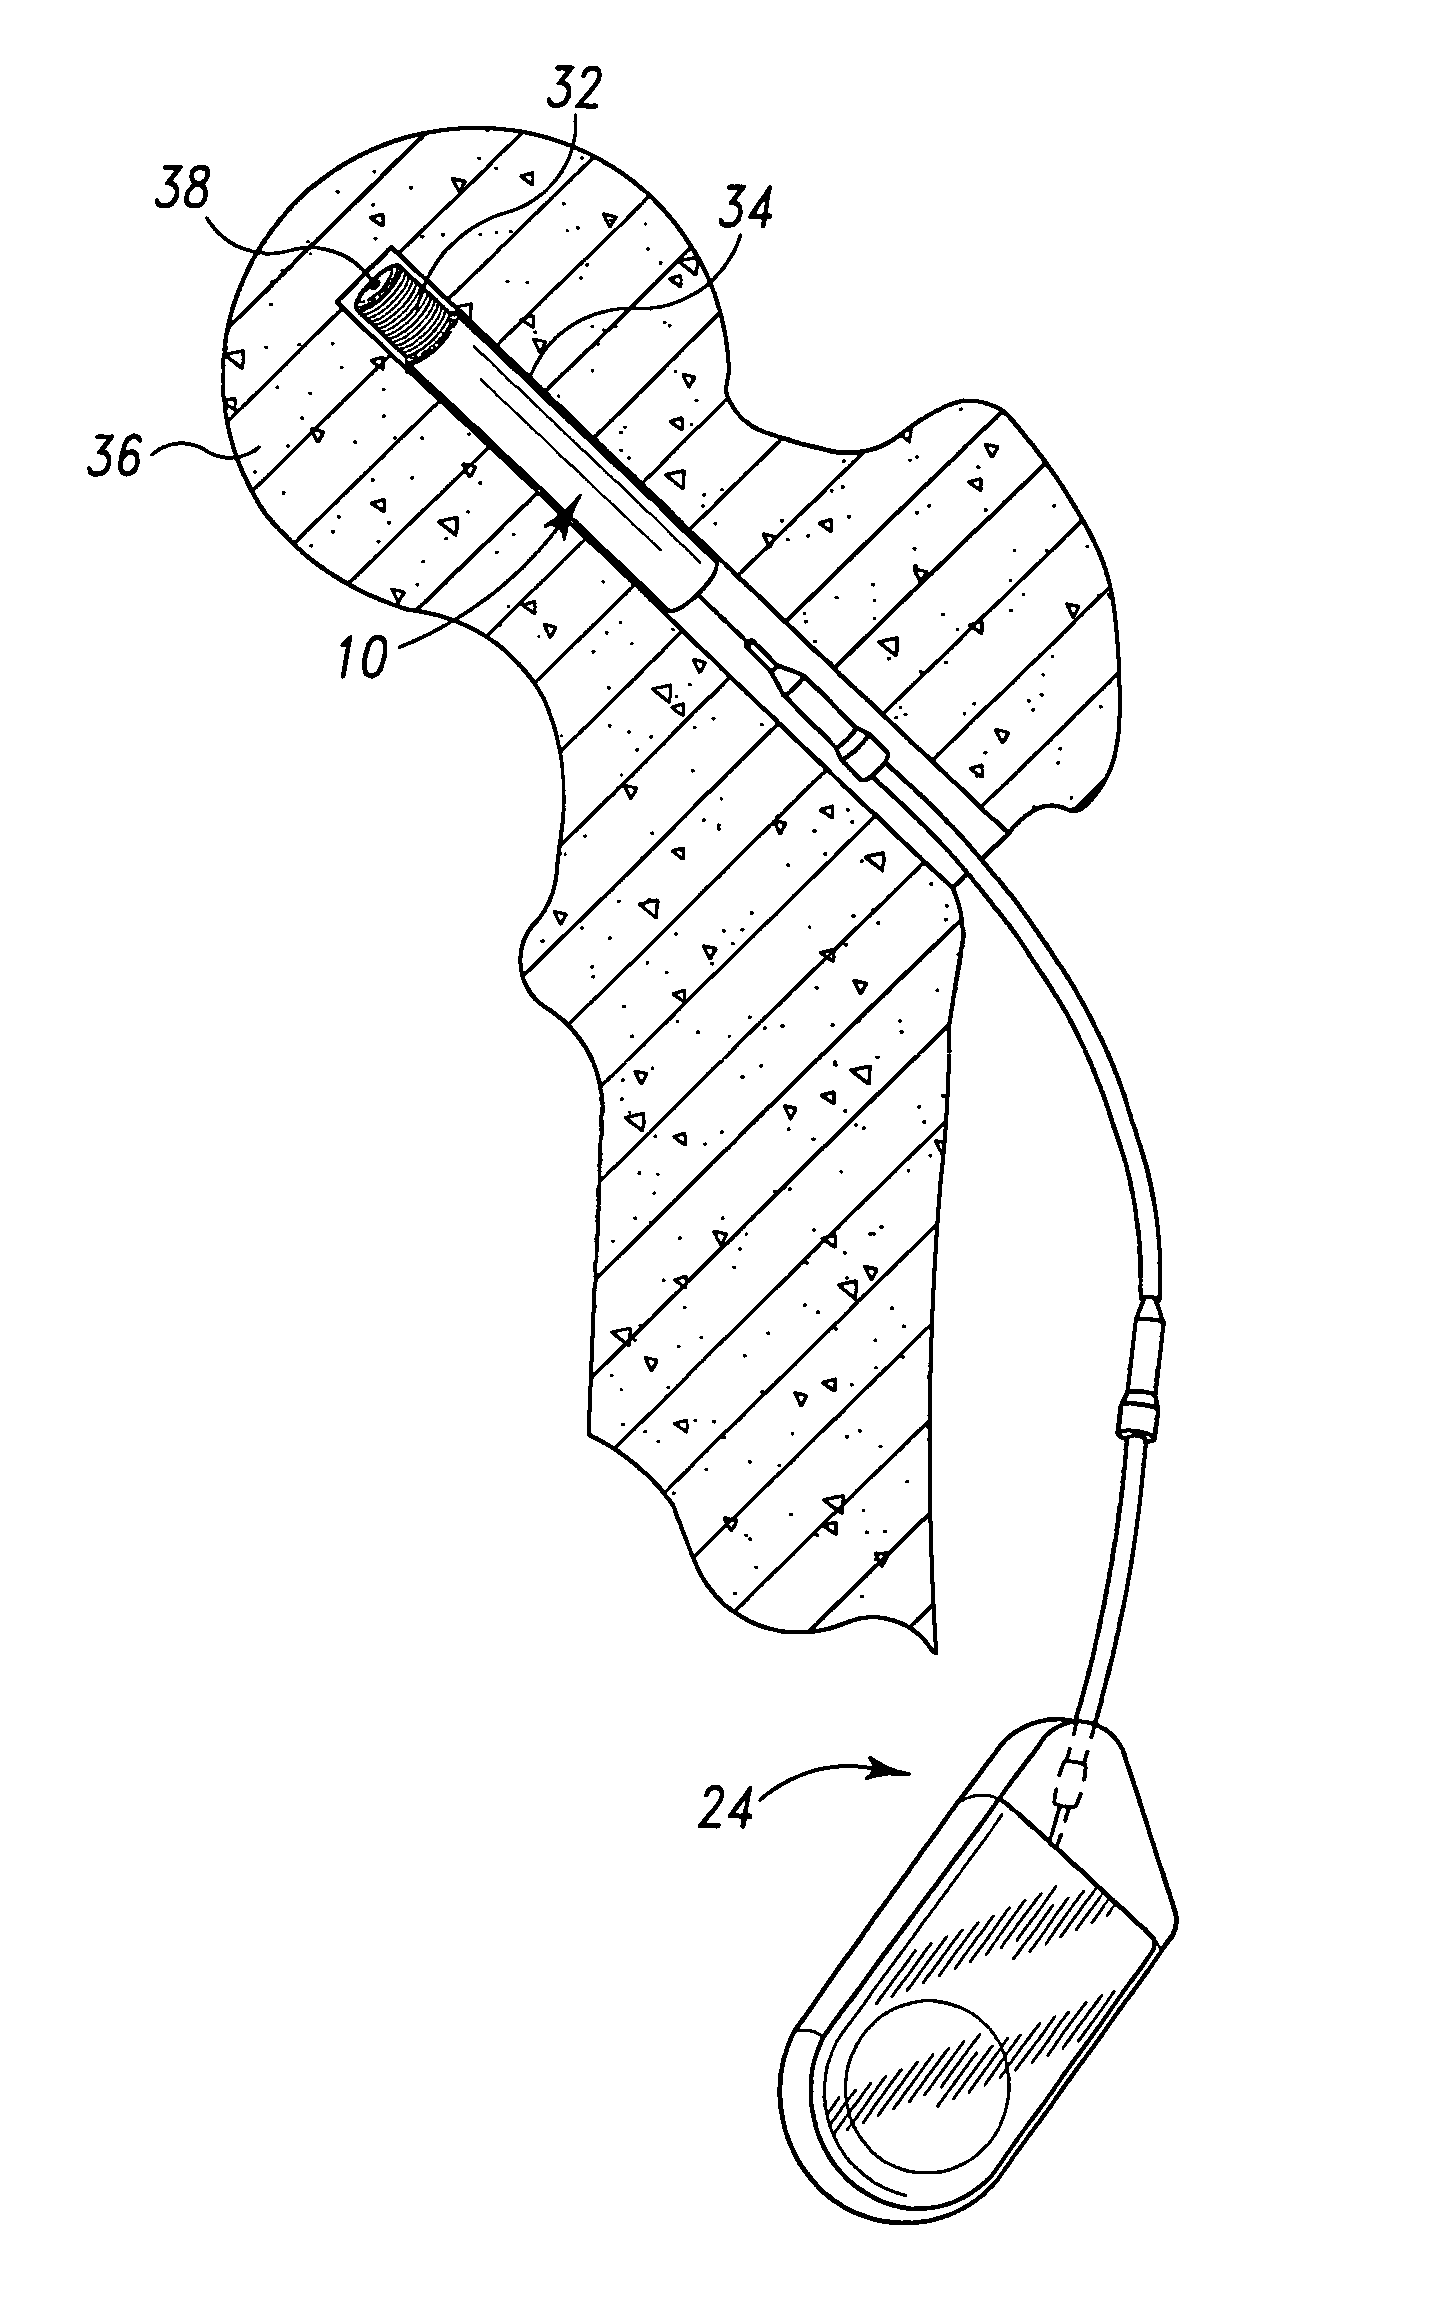 Methods and devices for treatment of osteonecrosis of the femoral head with core decompression